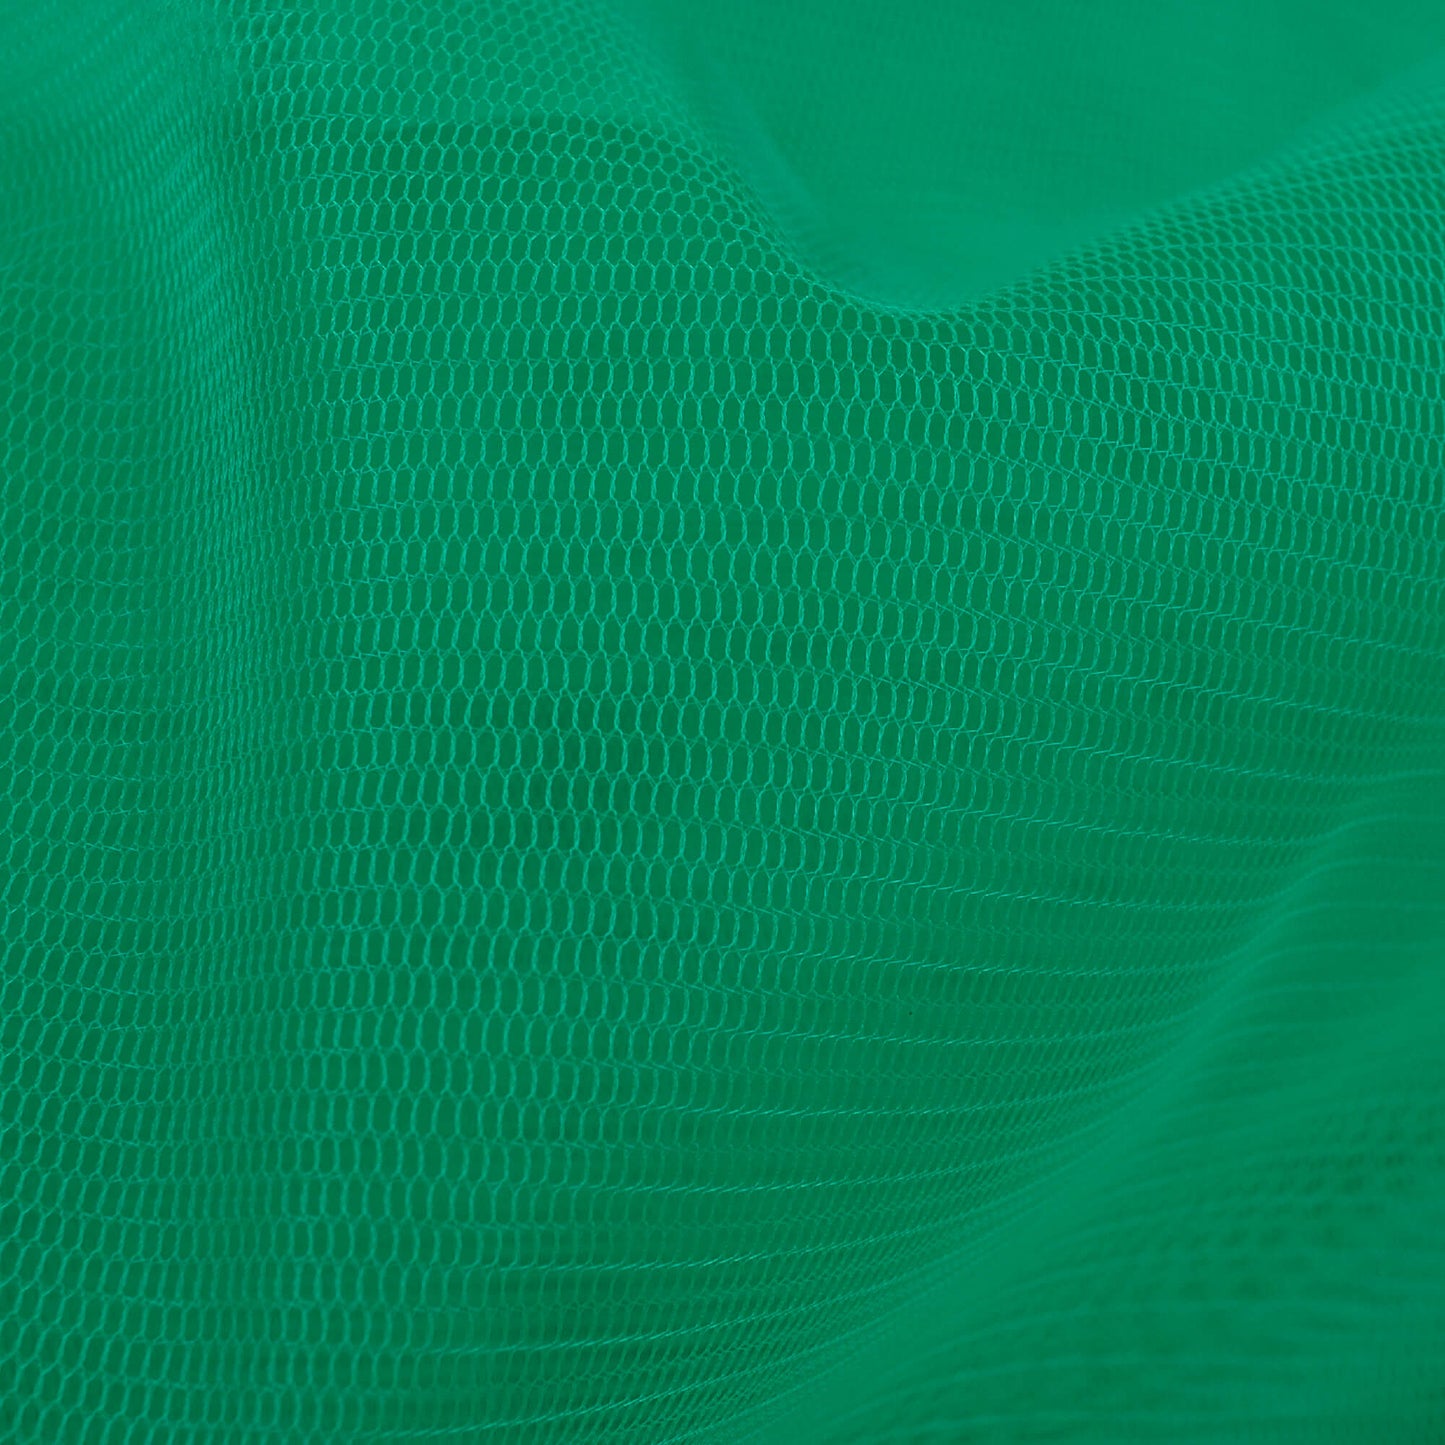 Emerled Green Plain Premium Quality Butterfly Net Fabric (Width 56 Inches)